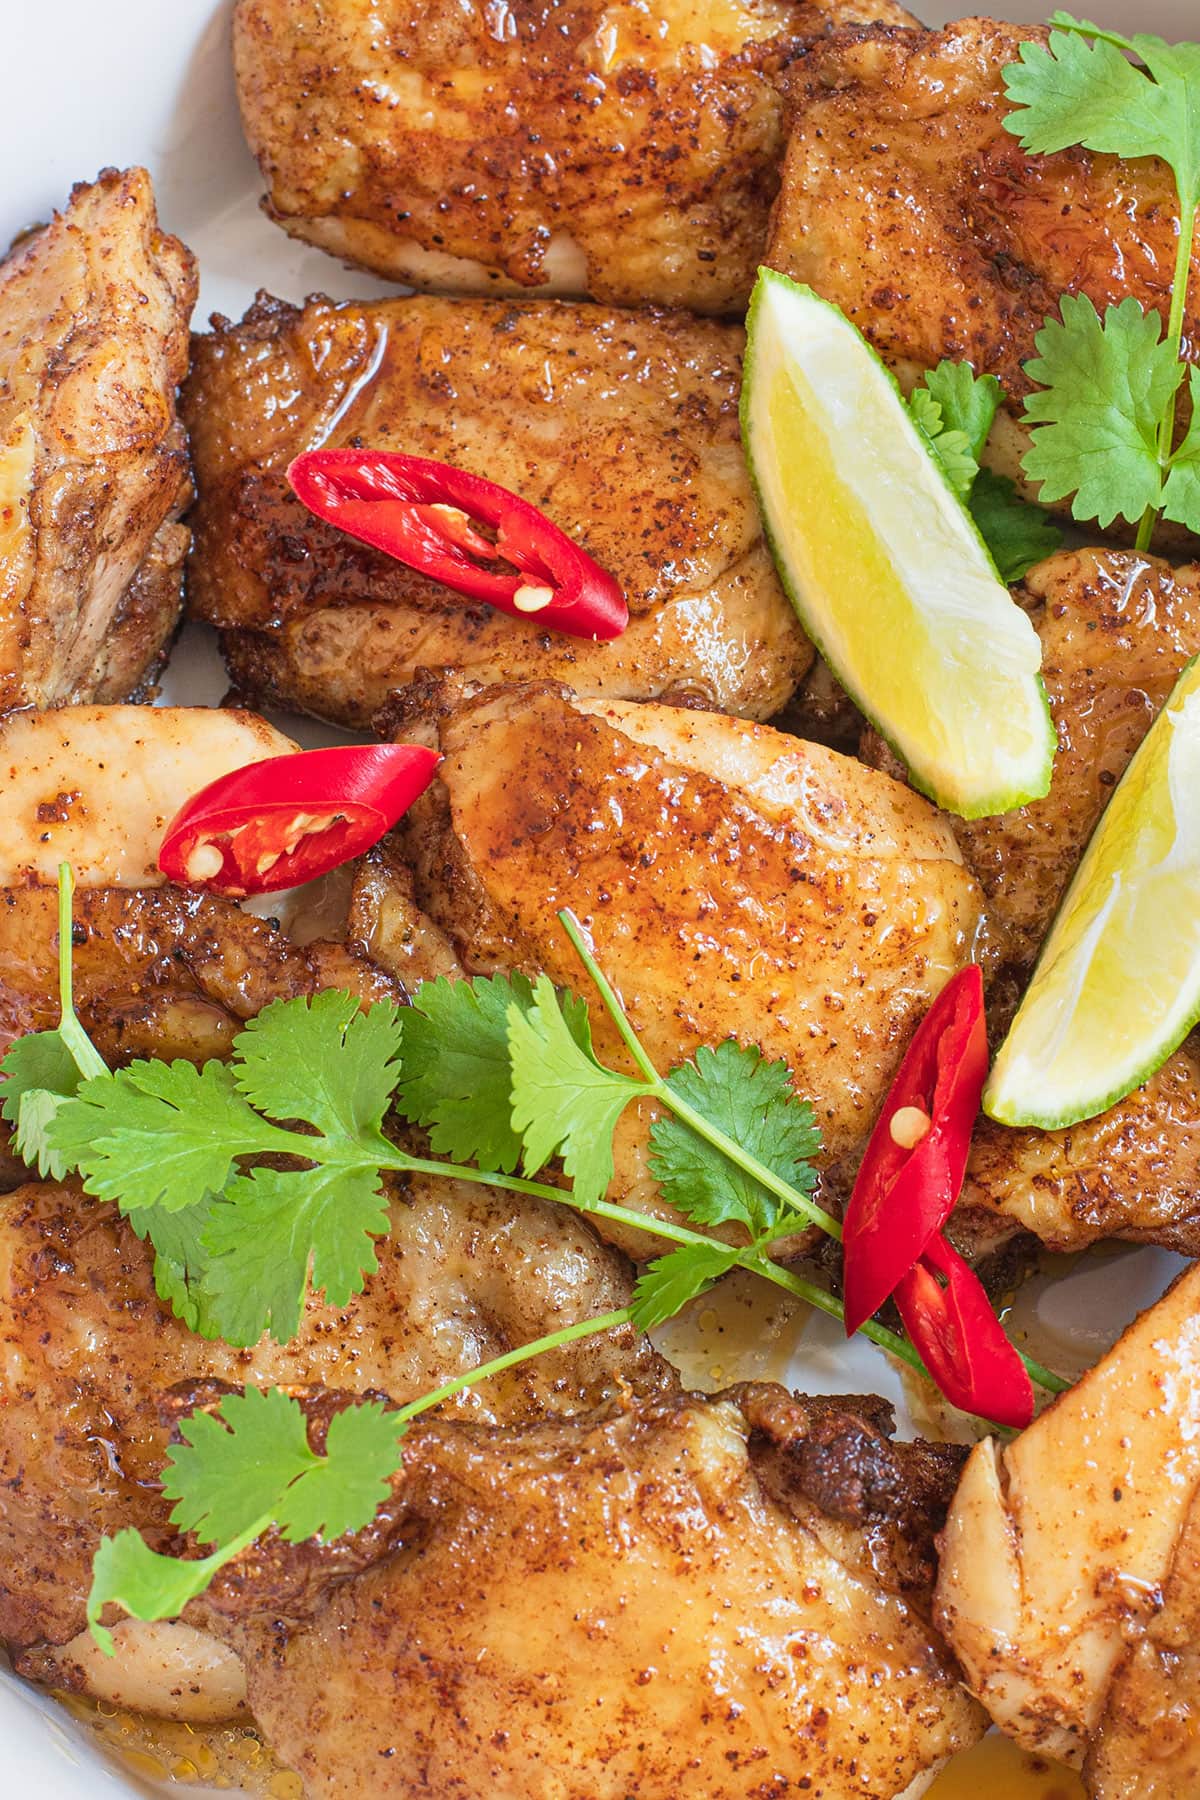 Asian five-spice chicken ready to serve.